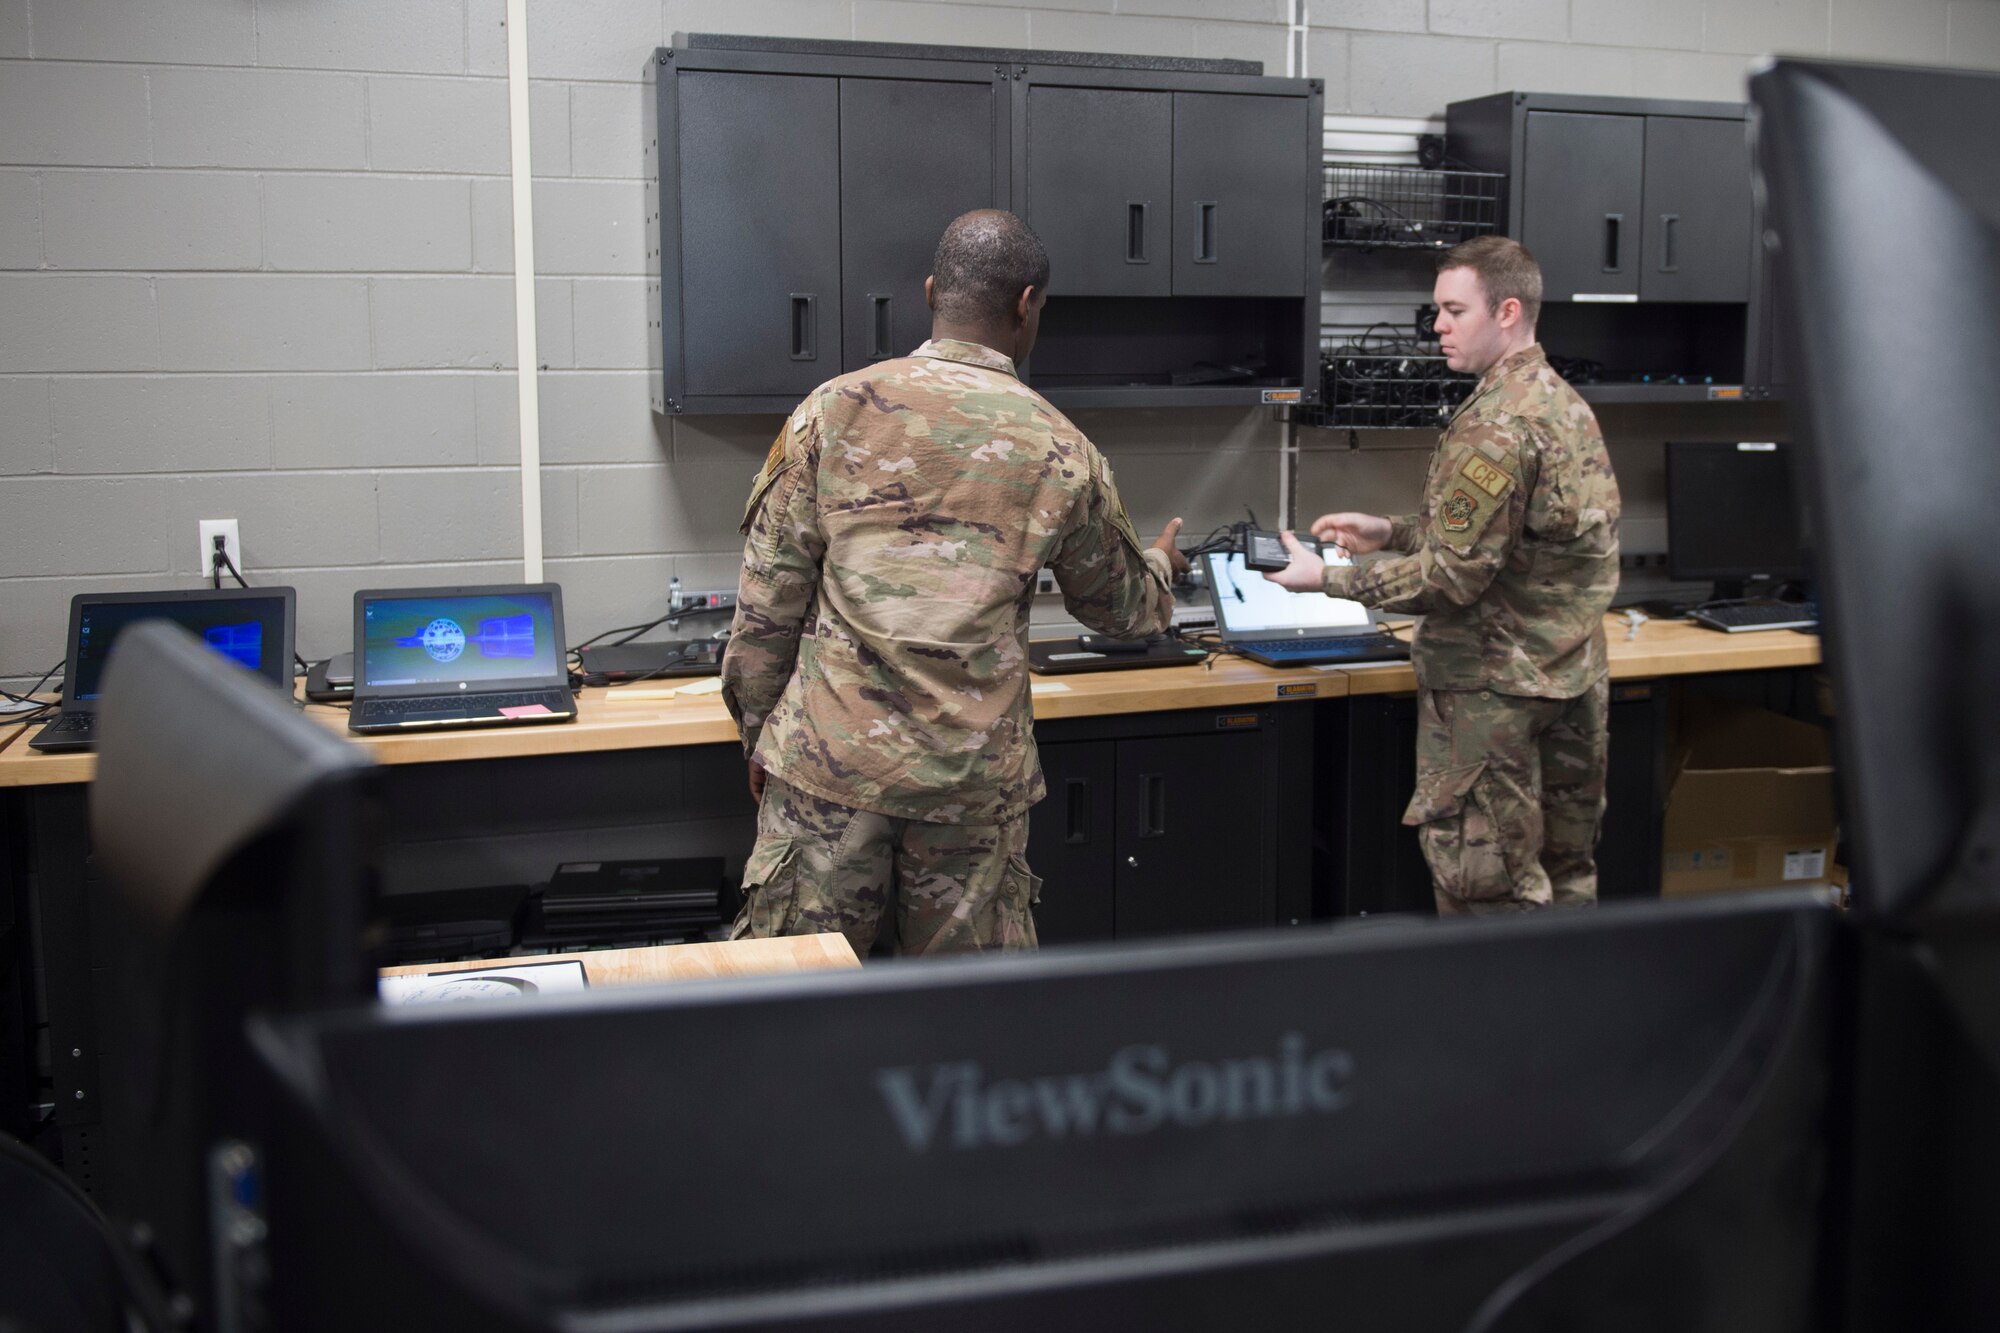 While many members of the 621st Contingency Response Wing are teleworking during COVID-19, two Airmen are still coming in to work to keep an essential part of the mission going at Joint-Base McGuire Dix Lakehurst, New Jersey.